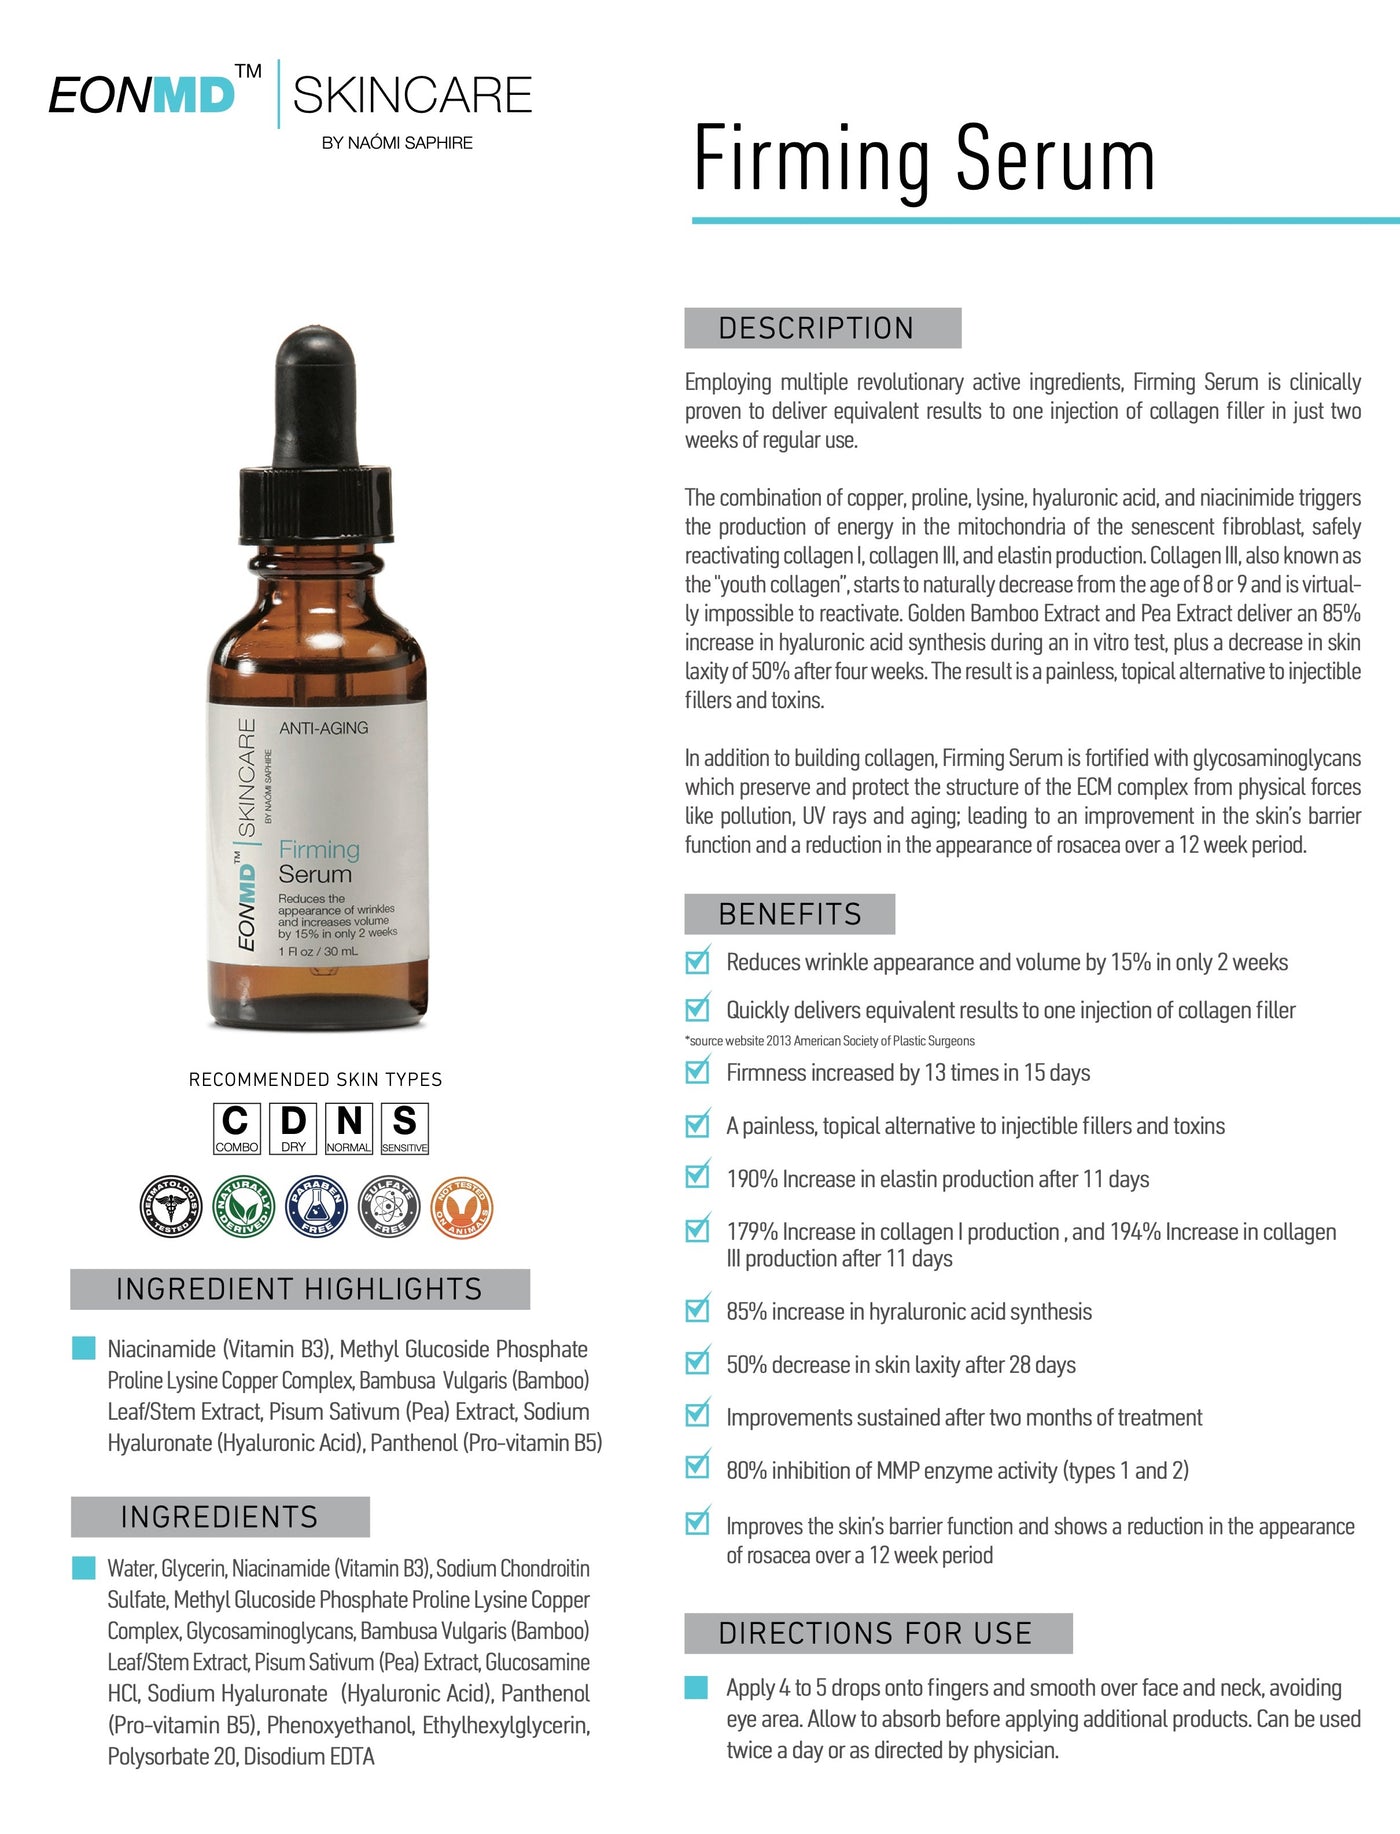 Employing multiple revolutionary active ingredients, Firming Serum is clinically proven to deliver equivalent results to one injection of collagen filler in just two weeks of regular use. The combination of copper, proline, lysine, hyaluronic acid, and Niacinamide triggers the production of energy in the mitochondria of the senescent fibroblast, safely reactivating collagen I, collagen III, and elastin production.